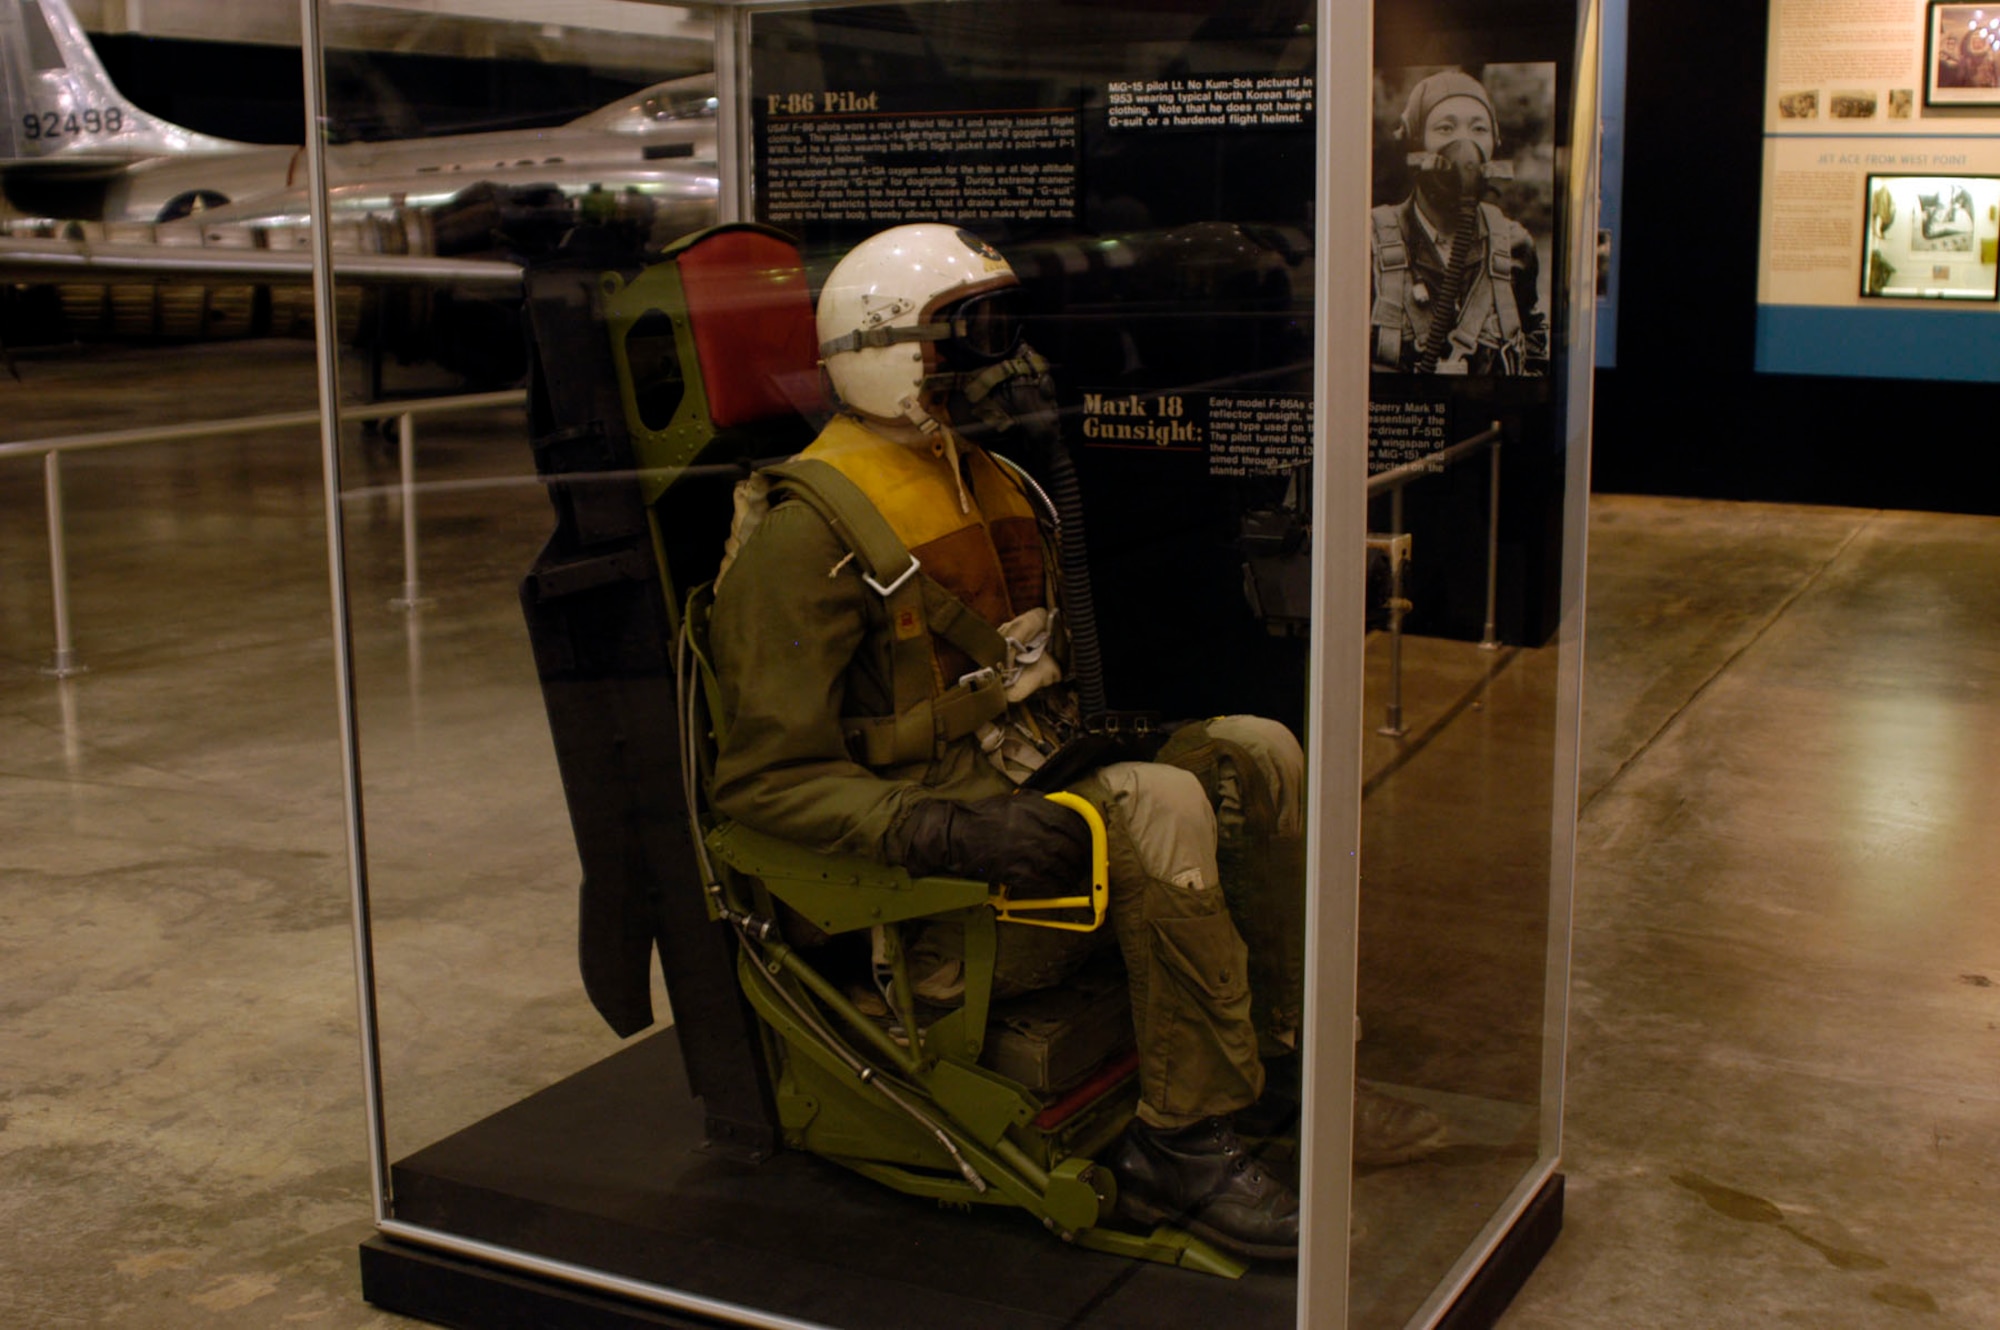 DAYTON, Ohio -- F-86 pilot uniform and Mark 18 gunsight on display in the Korean War Gallery at the National Museum of the United States Air Force. (U.S. Air Force photo)